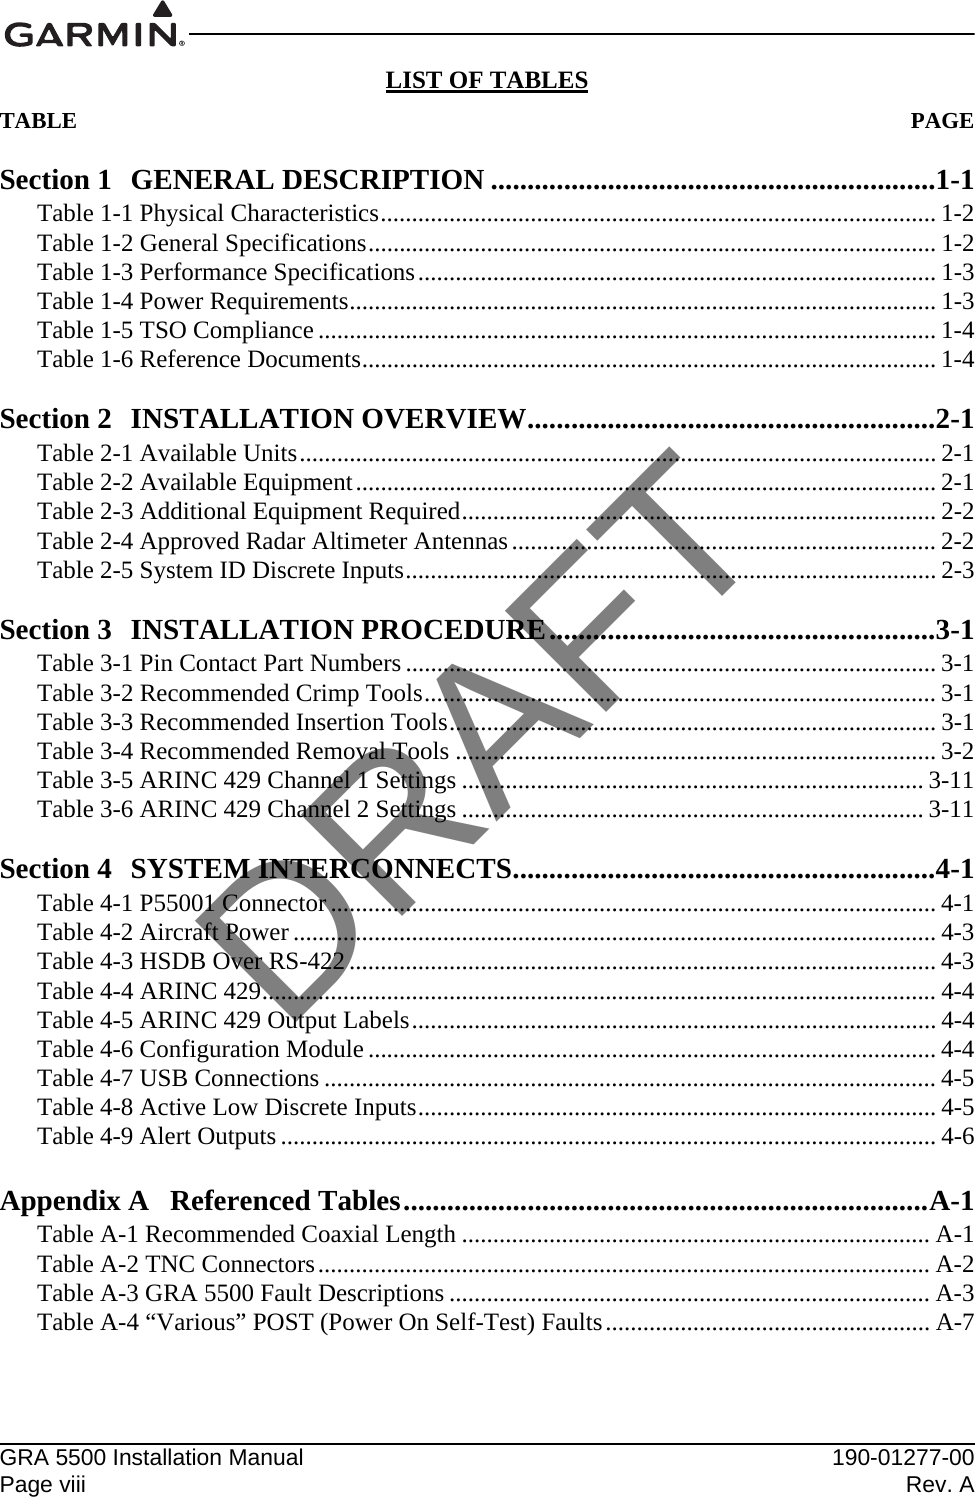 GRA 5500 Installation Manual 190-01277-00Page viii Rev. ALIST OF TABLESTABLE PAGESection 1 GENERAL DESCRIPTION .............................................................1-1Table 1-1 Physical Characteristics......................................................................................... 1-2Table 1-2 General Specifications........................................................................................... 1-2Table 1-3 Performance Specifications................................................................................... 1-3Table 1-4 Power Requirements.............................................................................................. 1-3Table 1-5 TSO Compliance ................................................................................................... 1-4Table 1-6 Reference Documents............................................................................................ 1-4Section 2 INSTALLATION OVERVIEW........................................................2-1Table 2-1 Available Units...................................................................................................... 2-1Table 2-2 Available Equipment............................................................................................. 2-1Table 2-3 Additional Equipment Required............................................................................ 2-2Table 2-4 Approved Radar Altimeter Antennas.................................................................... 2-2Table 2-5 System ID Discrete Inputs..................................................................................... 2-3Section 3 INSTALLATION PROCEDURE.....................................................3-1Table 3-1 Pin Contact Part Numbers ..................................................................................... 3-1Table 3-2 Recommended Crimp Tools.................................................................................. 3-1Table 3-3 Recommended Insertion Tools.............................................................................. 3-1Table 3-4 Recommended Removal Tools ............................................................................. 3-2Table 3-5 ARINC 429 Channel 1 Settings .......................................................................... 3-11Table 3-6 ARINC 429 Channel 2 Settings .......................................................................... 3-11Section 4 SYSTEM INTERCONNECTS..........................................................4-1Table 4-1 P55001 Connector ................................................................................................. 4-1Table 4-2 Aircraft Power ....................................................................................................... 4-3Table 4-3 HSDB Over RS-422 .............................................................................................. 4-3Table 4-4 ARINC 429............................................................................................................ 4-4Table 4-5 ARINC 429 Output Labels.................................................................................... 4-4Table 4-6 Configuration Module ........................................................................................... 4-4Table 4-7 USB Connections .................................................................................................. 4-5Table 4-8 Active Low Discrete Inputs................................................................................... 4-5Table 4-9 Alert Outputs .........................................................................................................4-6Appendix A Referenced Tables........................................................................A-1Table A-1 Recommended Coaxial Length ........................................................................... A-1Table A-2 TNC Connectors.................................................................................................. A-2Table A-3 GRA 5500 Fault Descriptions ............................................................................. A-3Table A-4 “Various” POST (Power On Self-Test) Faults.................................................... A-7DRAFT